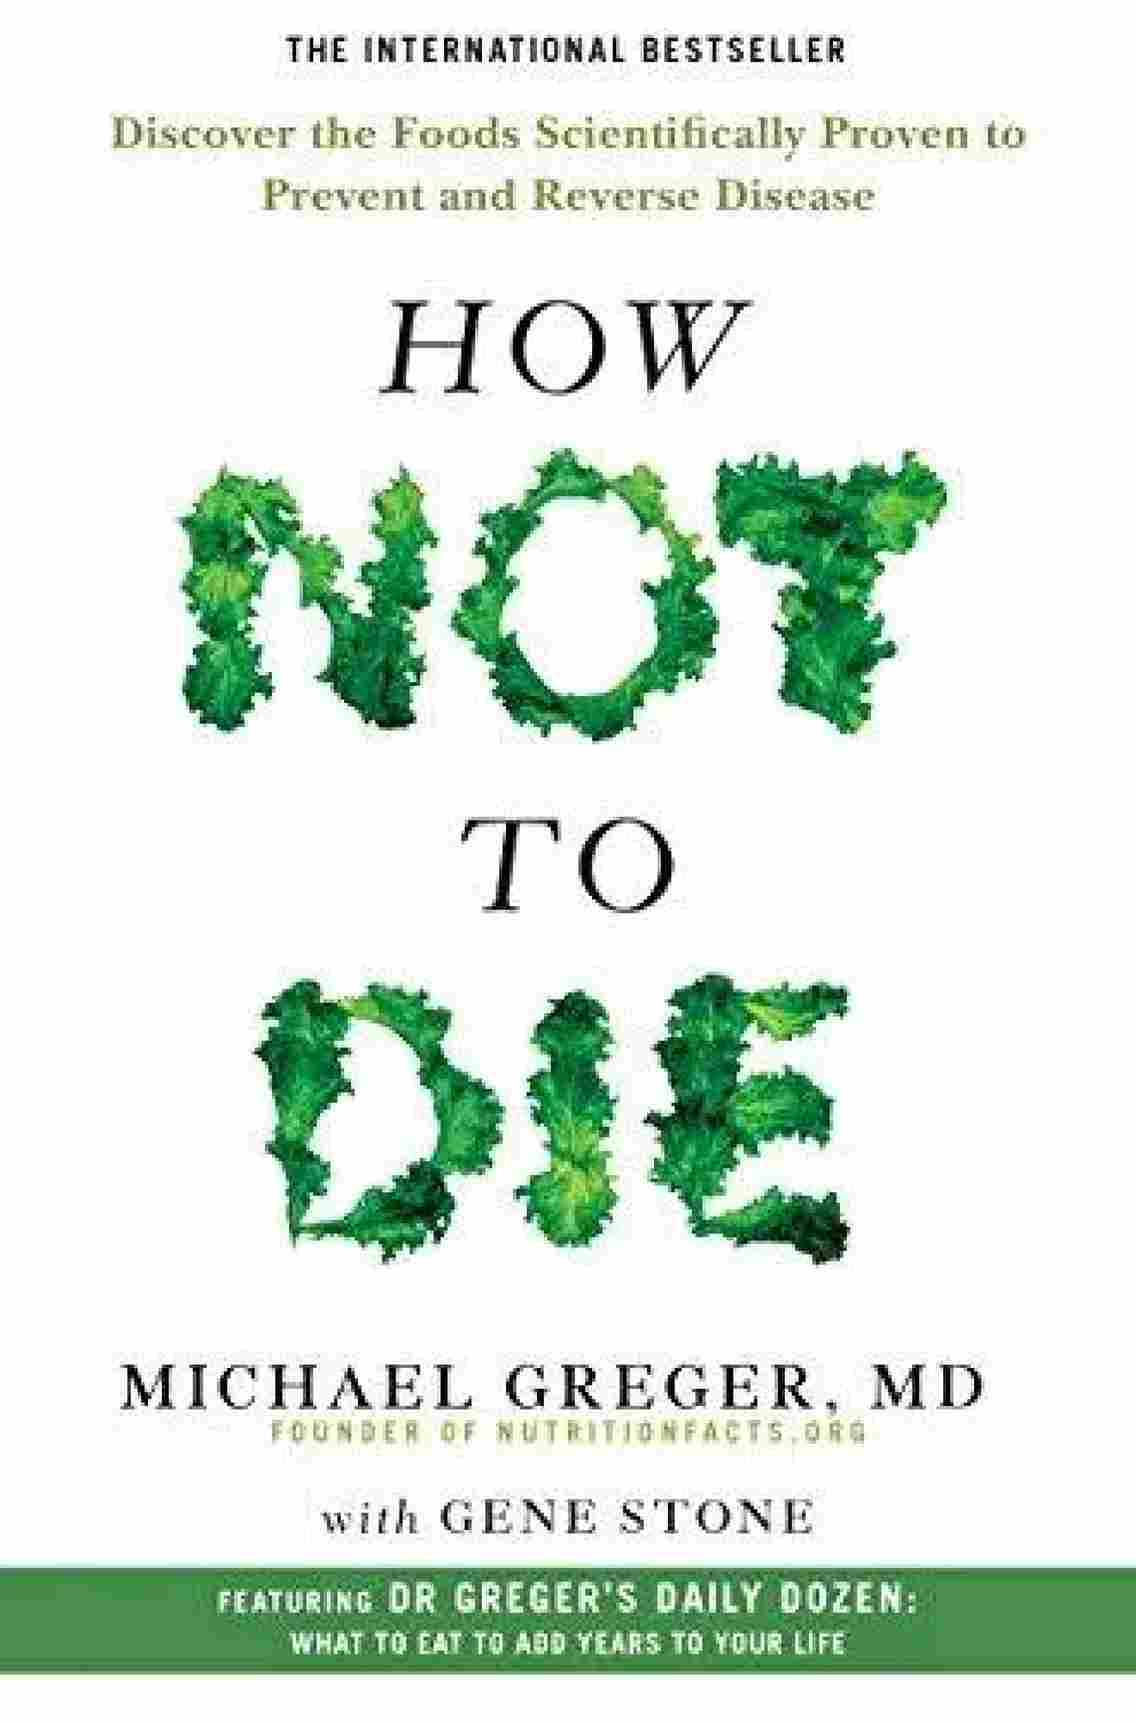 How not to die (Paperback) - Michael Greger MD, Gene Stone - 99BooksStore